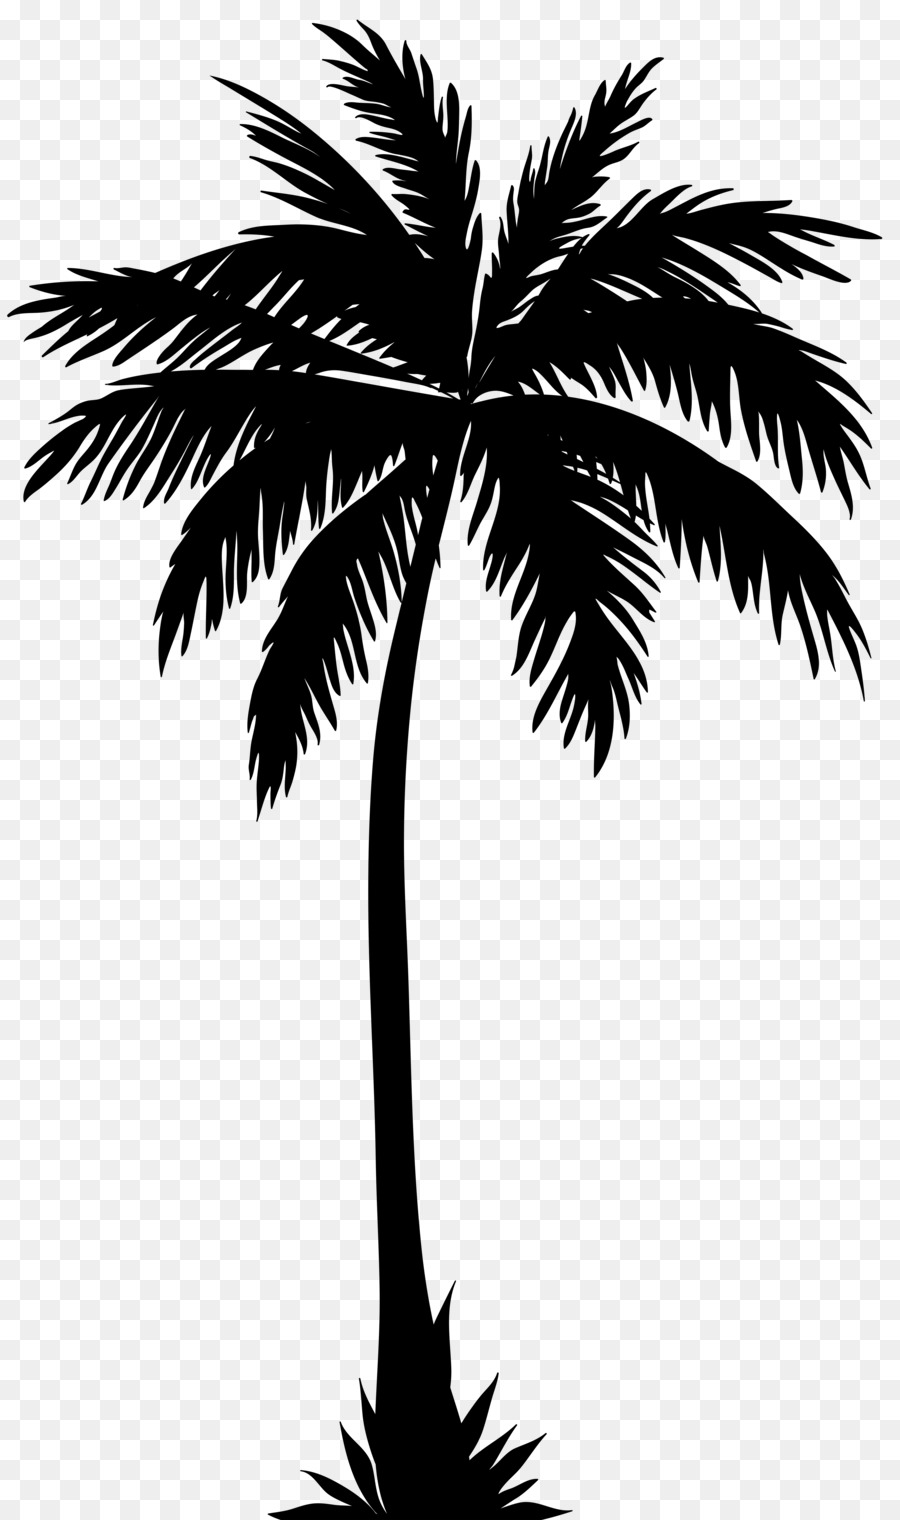 Arecaceae Silhouette Tree Clip art - palm tree png download - 4738*8000 - Free Transparent Arecaceae png Download.